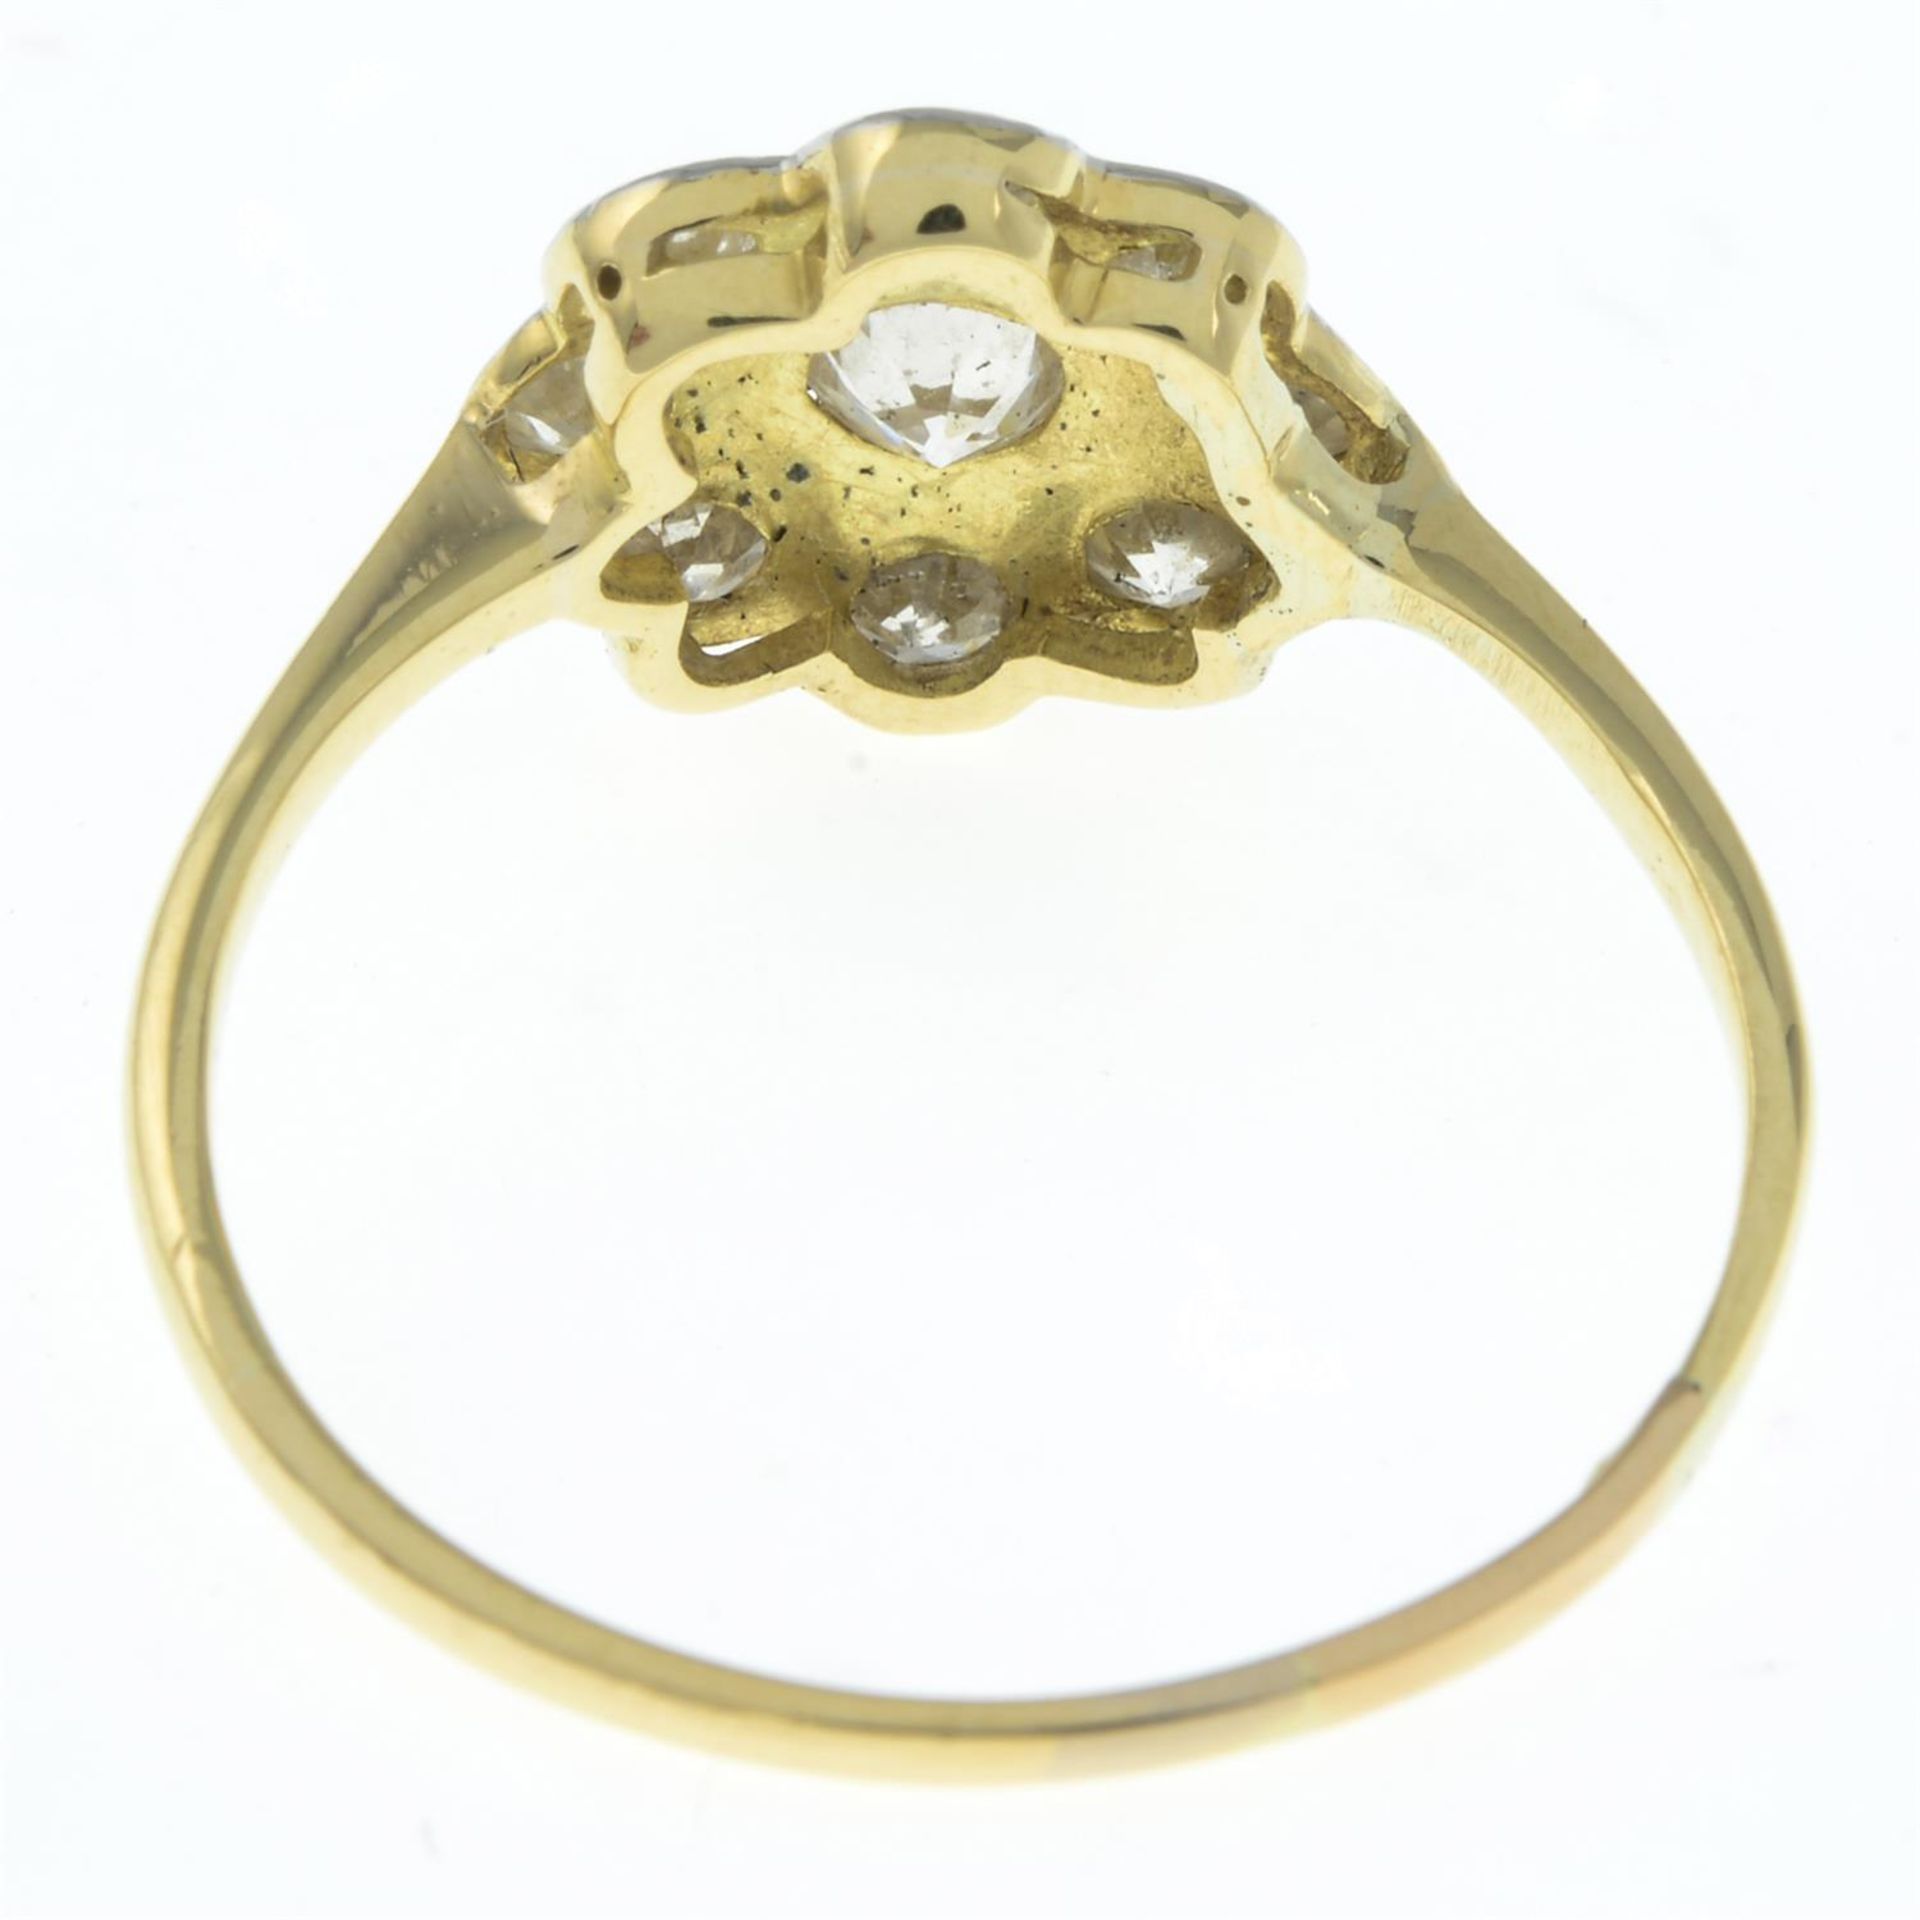 Diamond cluster ring - Image 2 of 2